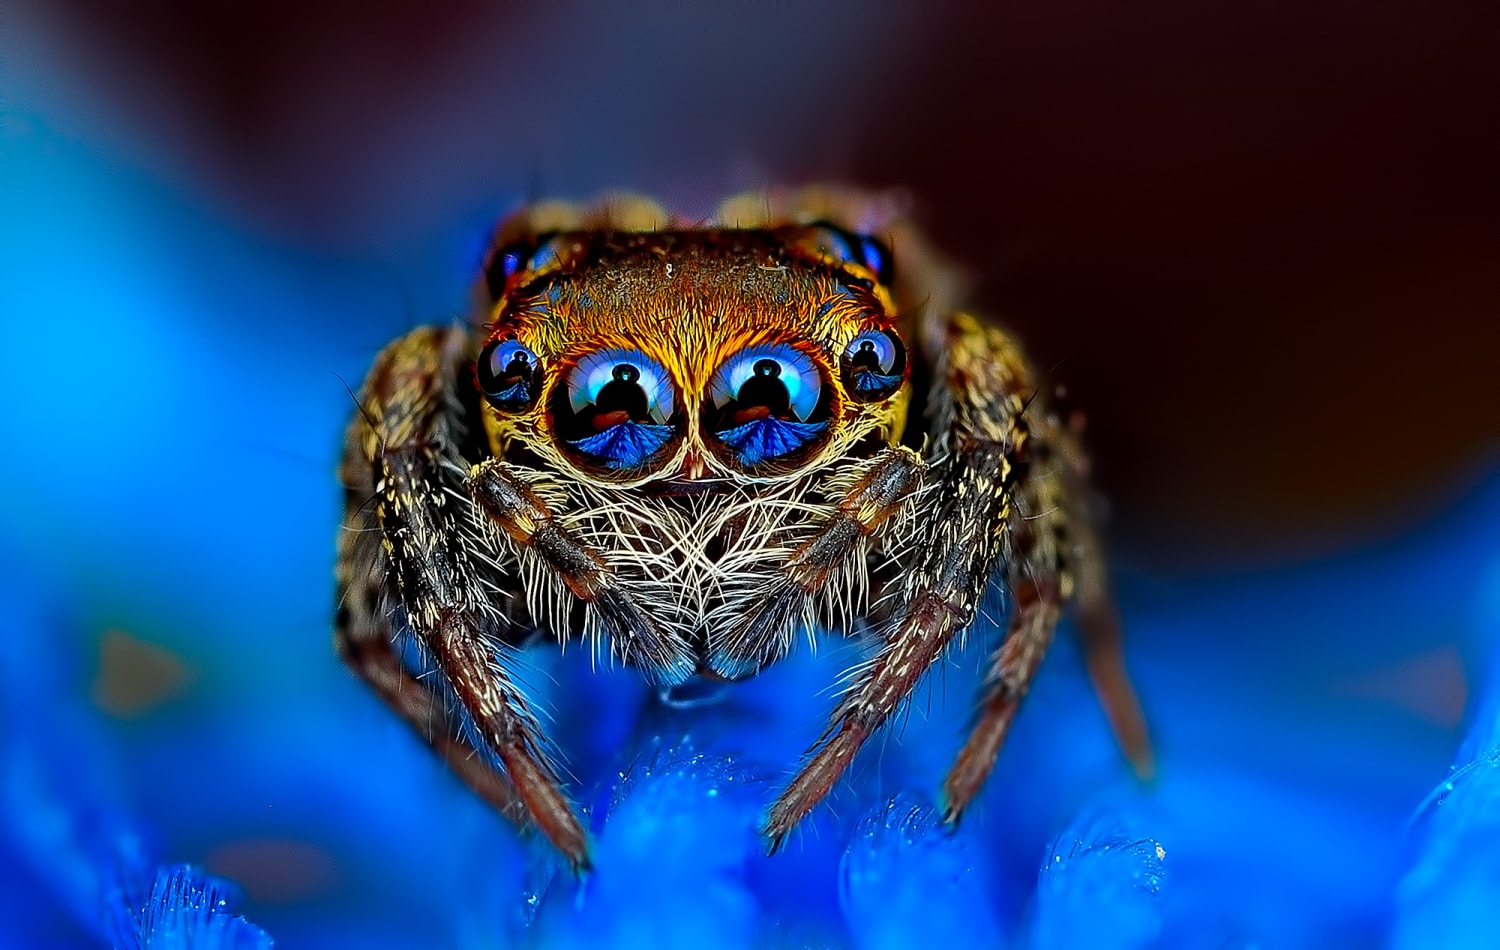 Spider's Eyes capturing the reflection of the Photographer